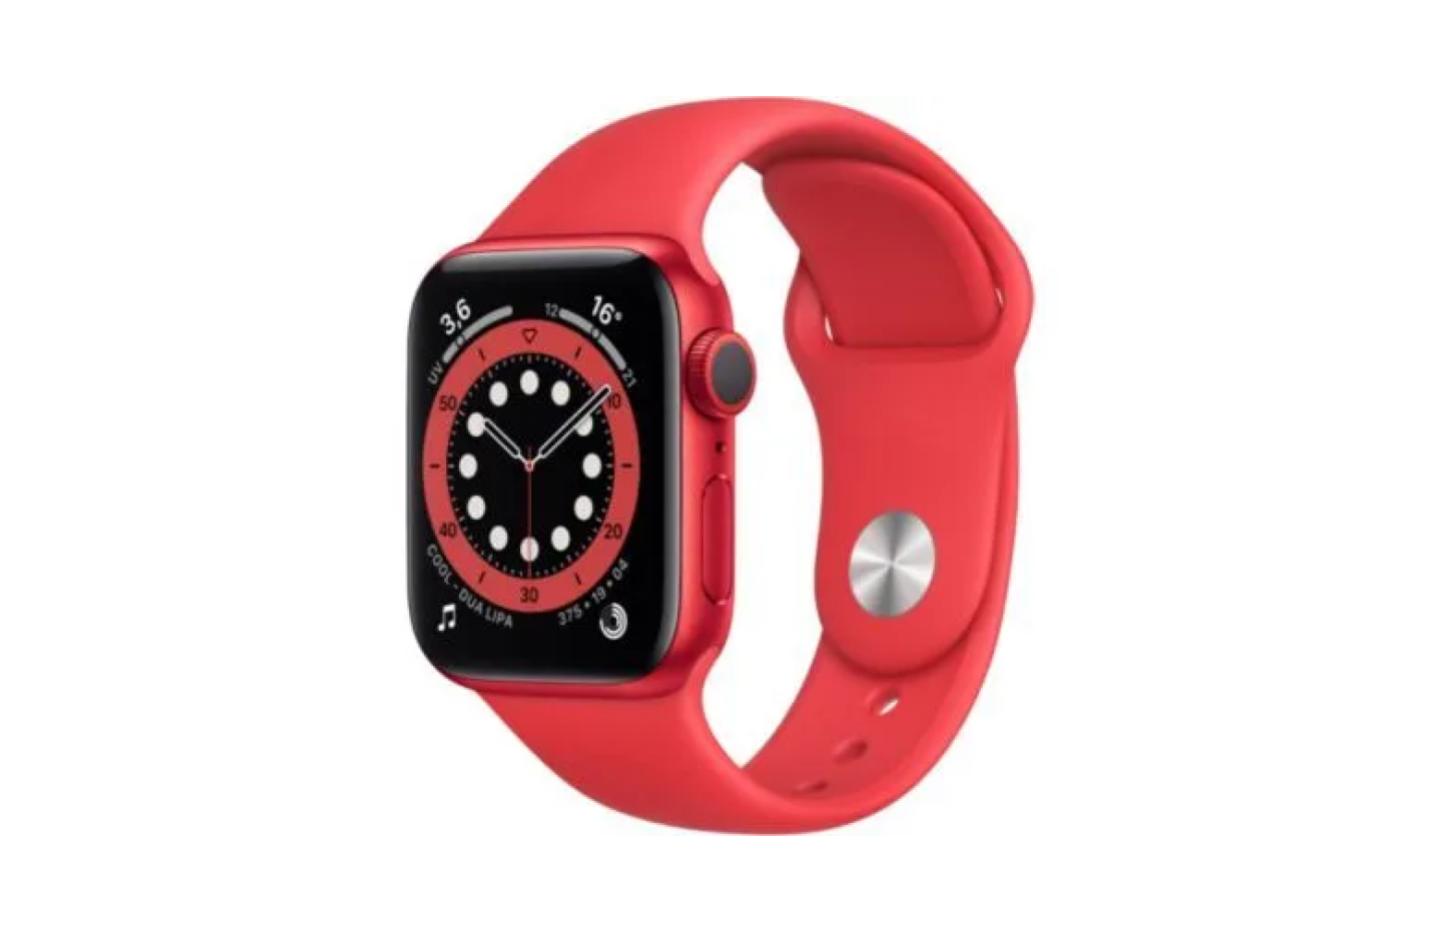 Apple Watch Series 6 price drops, day before Series 7 release thumbnail